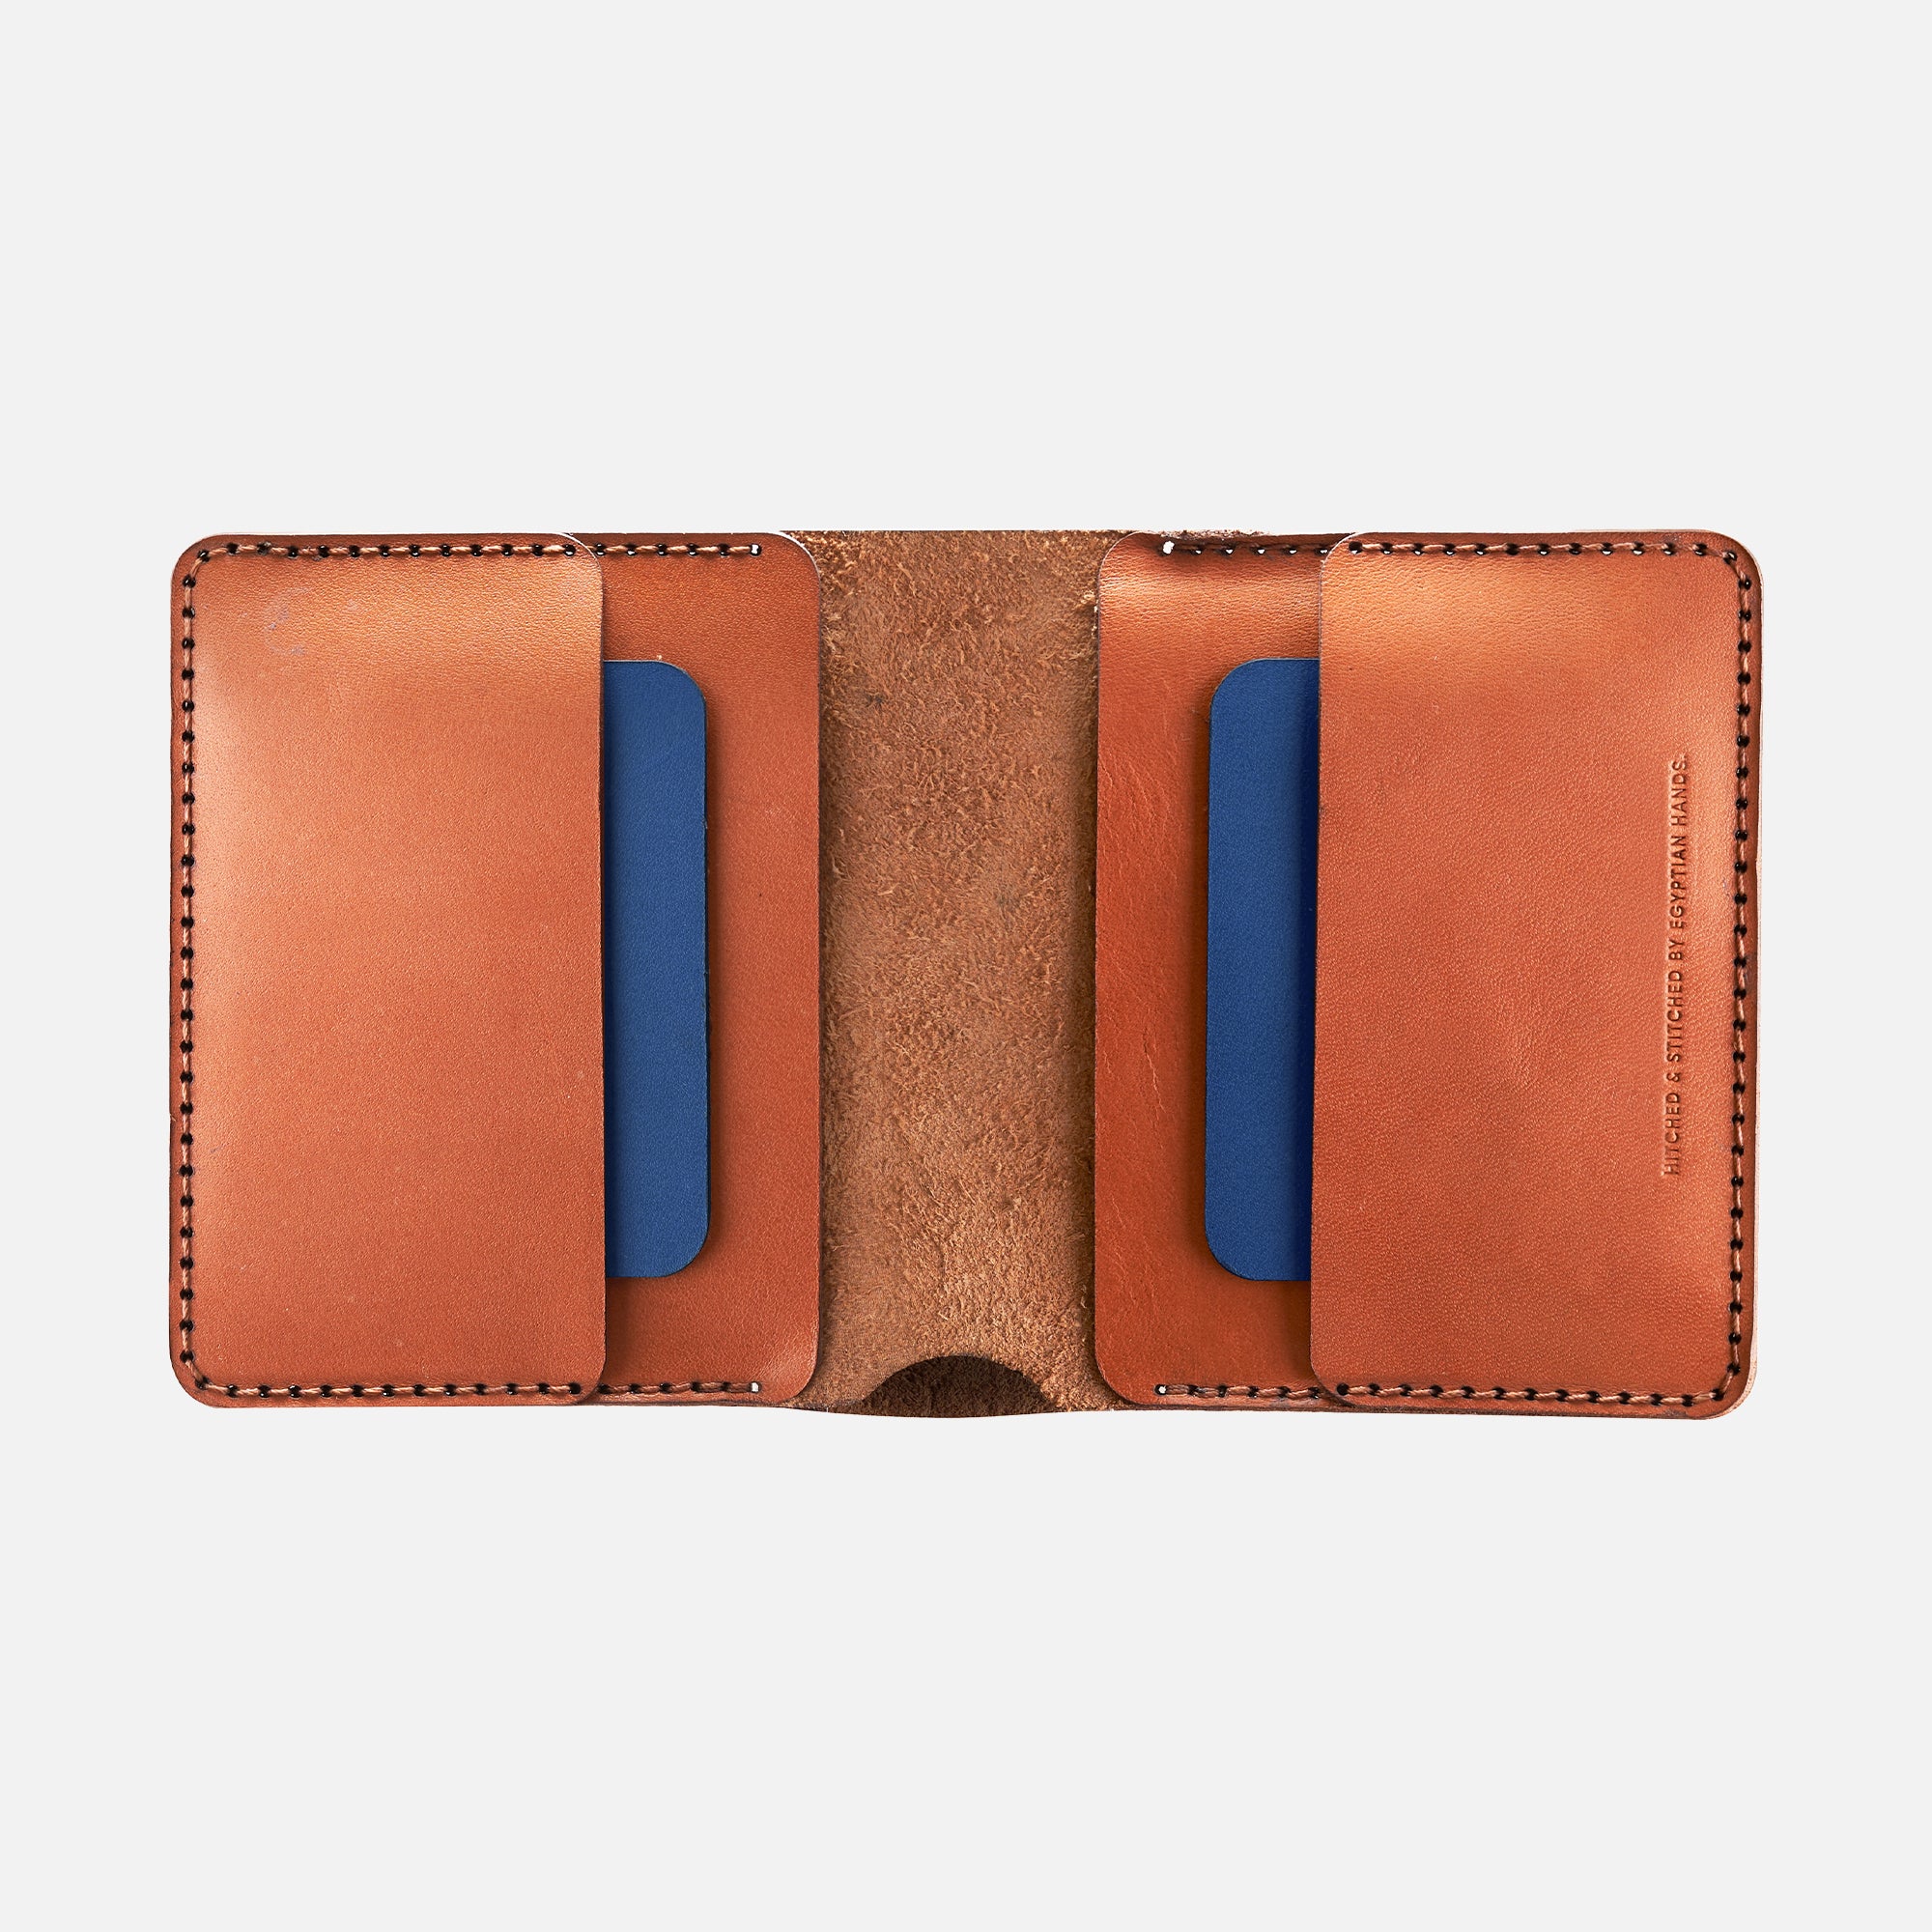 Brown leather bifold wallet open flat showing blue card slots and stitched edges.